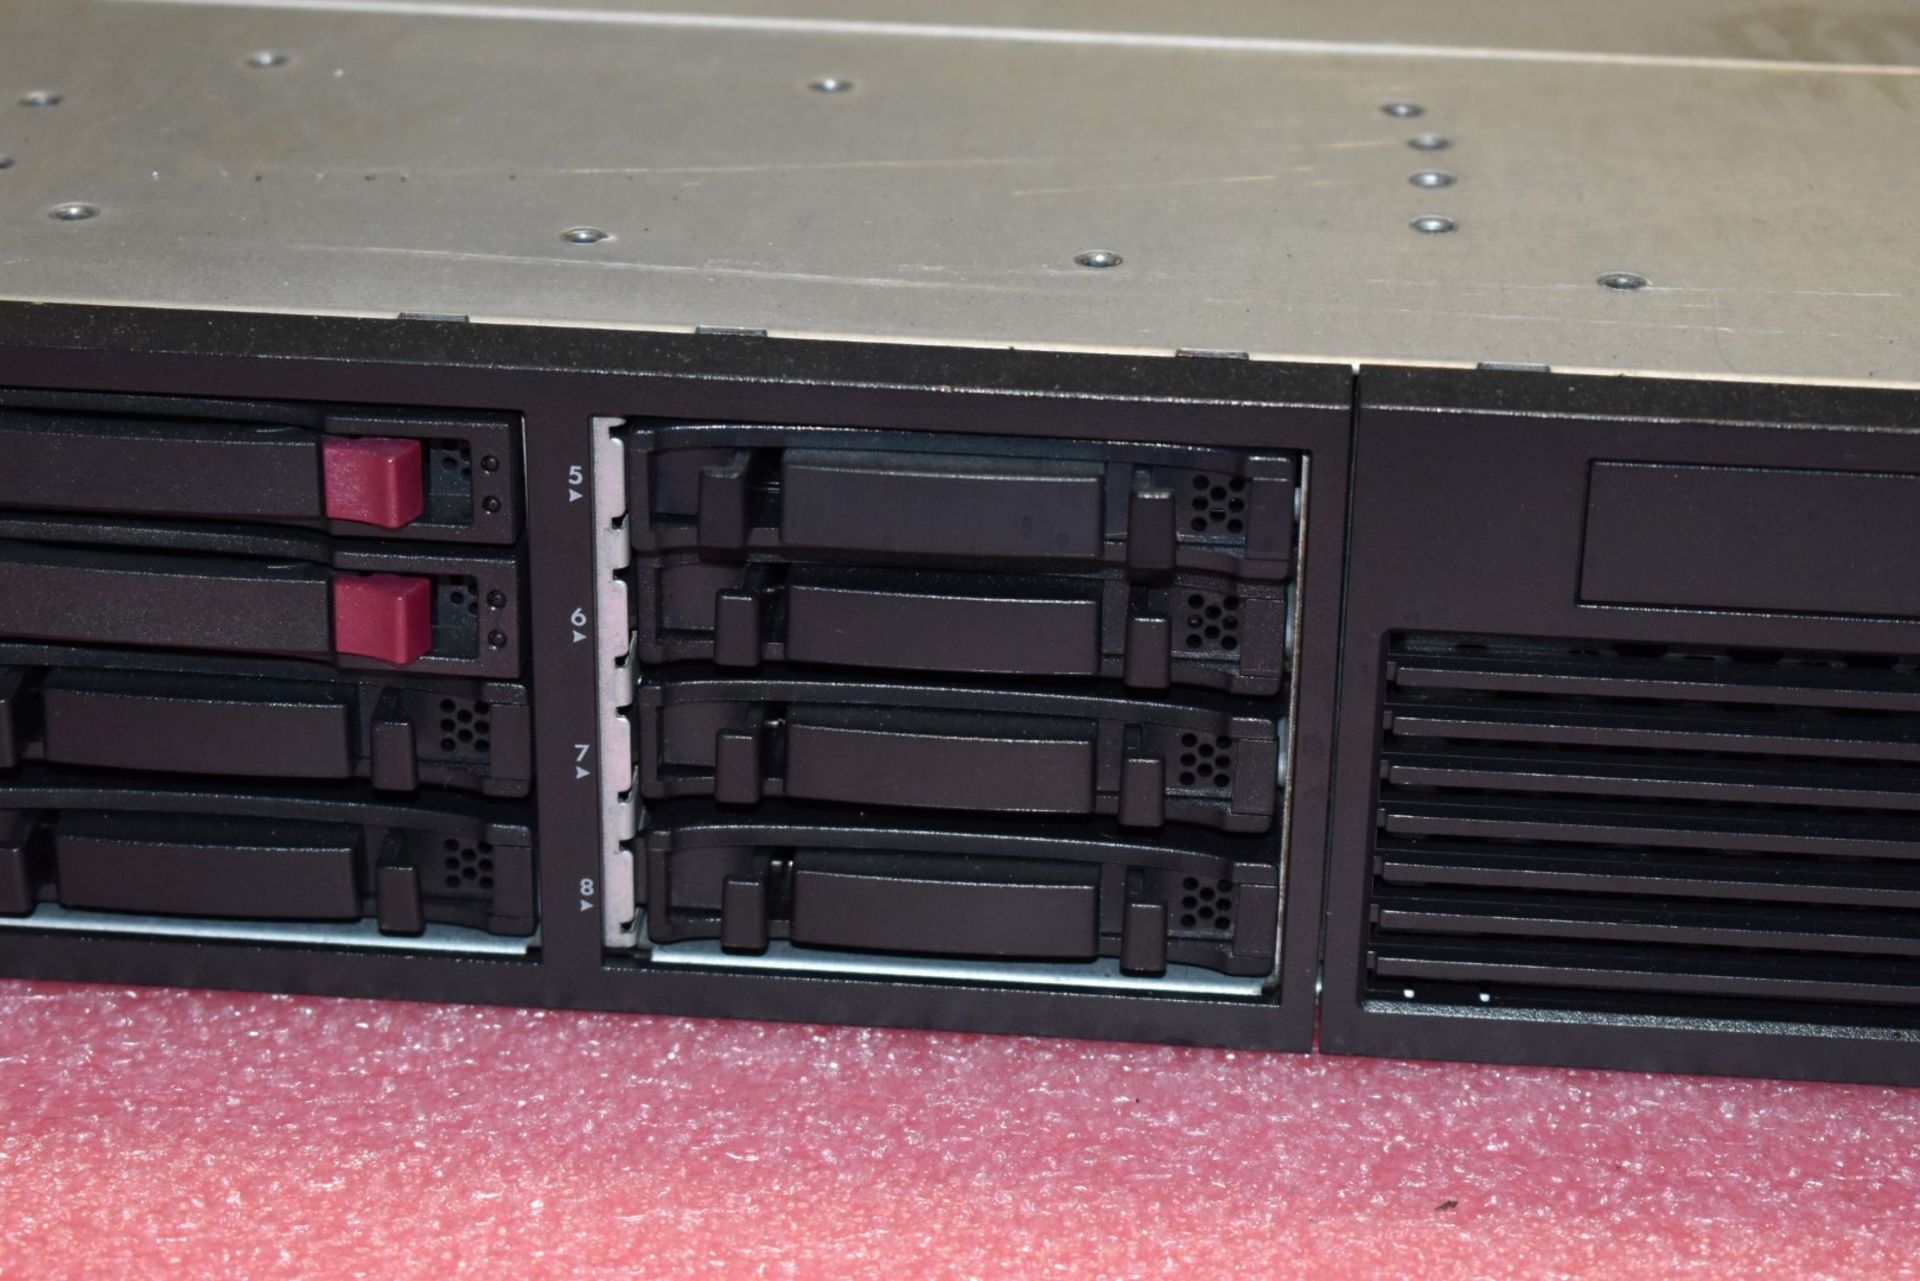 1 x HP ProLiant DL380 G7 Server With 2 x Intel Xeon X5650 Six Core 3.06ghz Processors and 92gb Ram - - Image 4 of 8